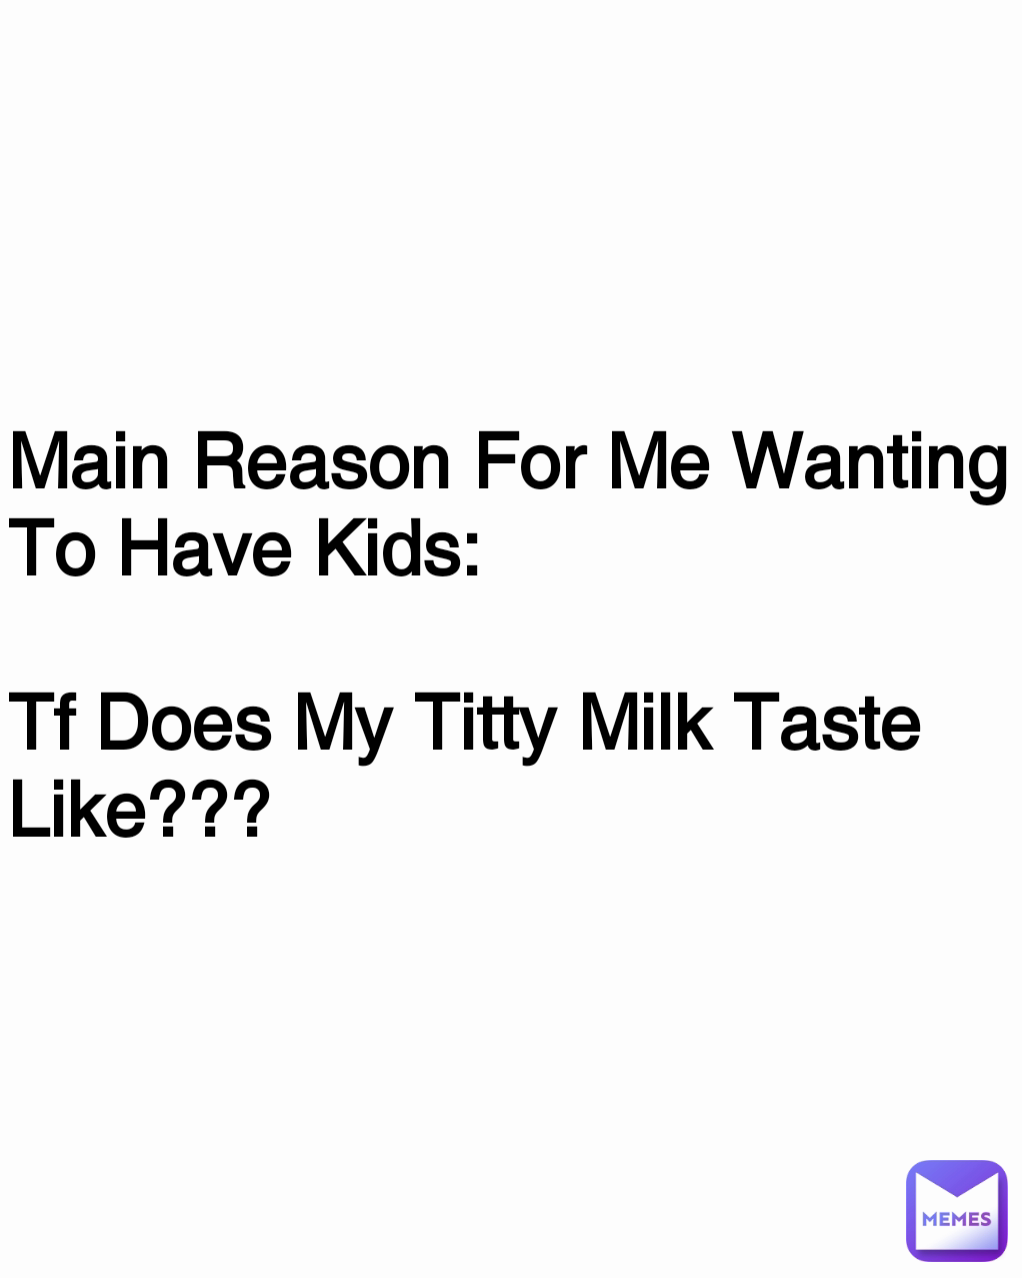 Main Reason For Me Wanting To Have Kids:

Tf Does My Titty Milk Taste Like???